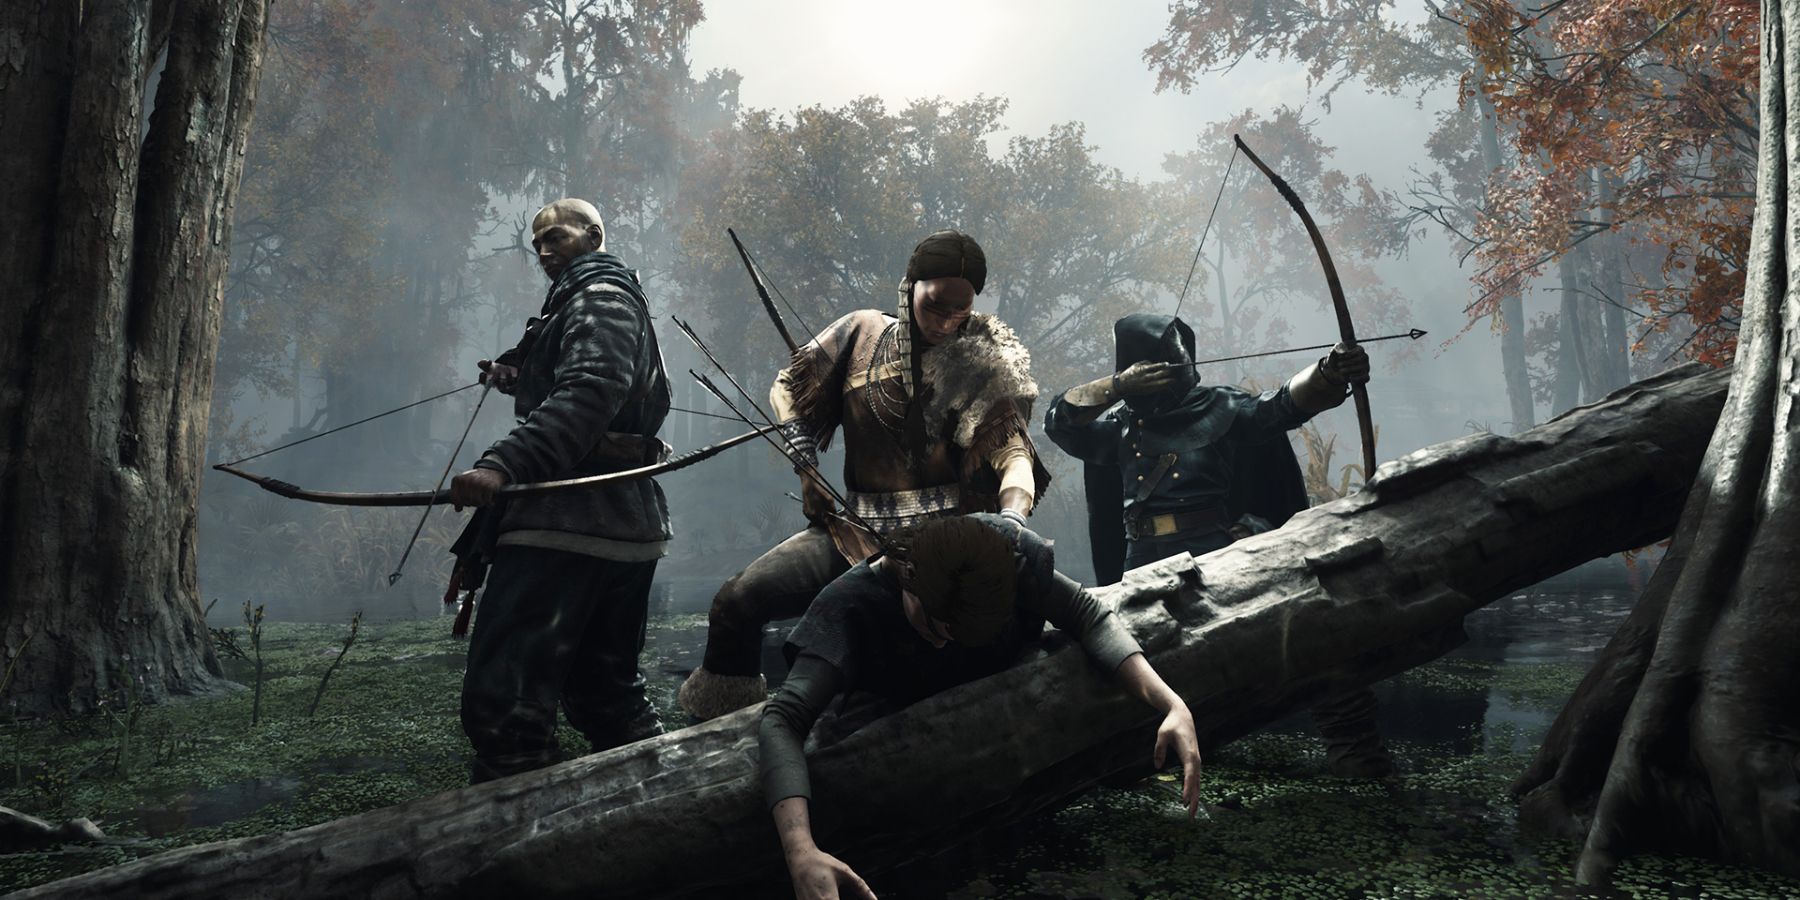 Hunt: Showdown's Clue mechanics give players enough information to track enemy teams and anticipate their movements.